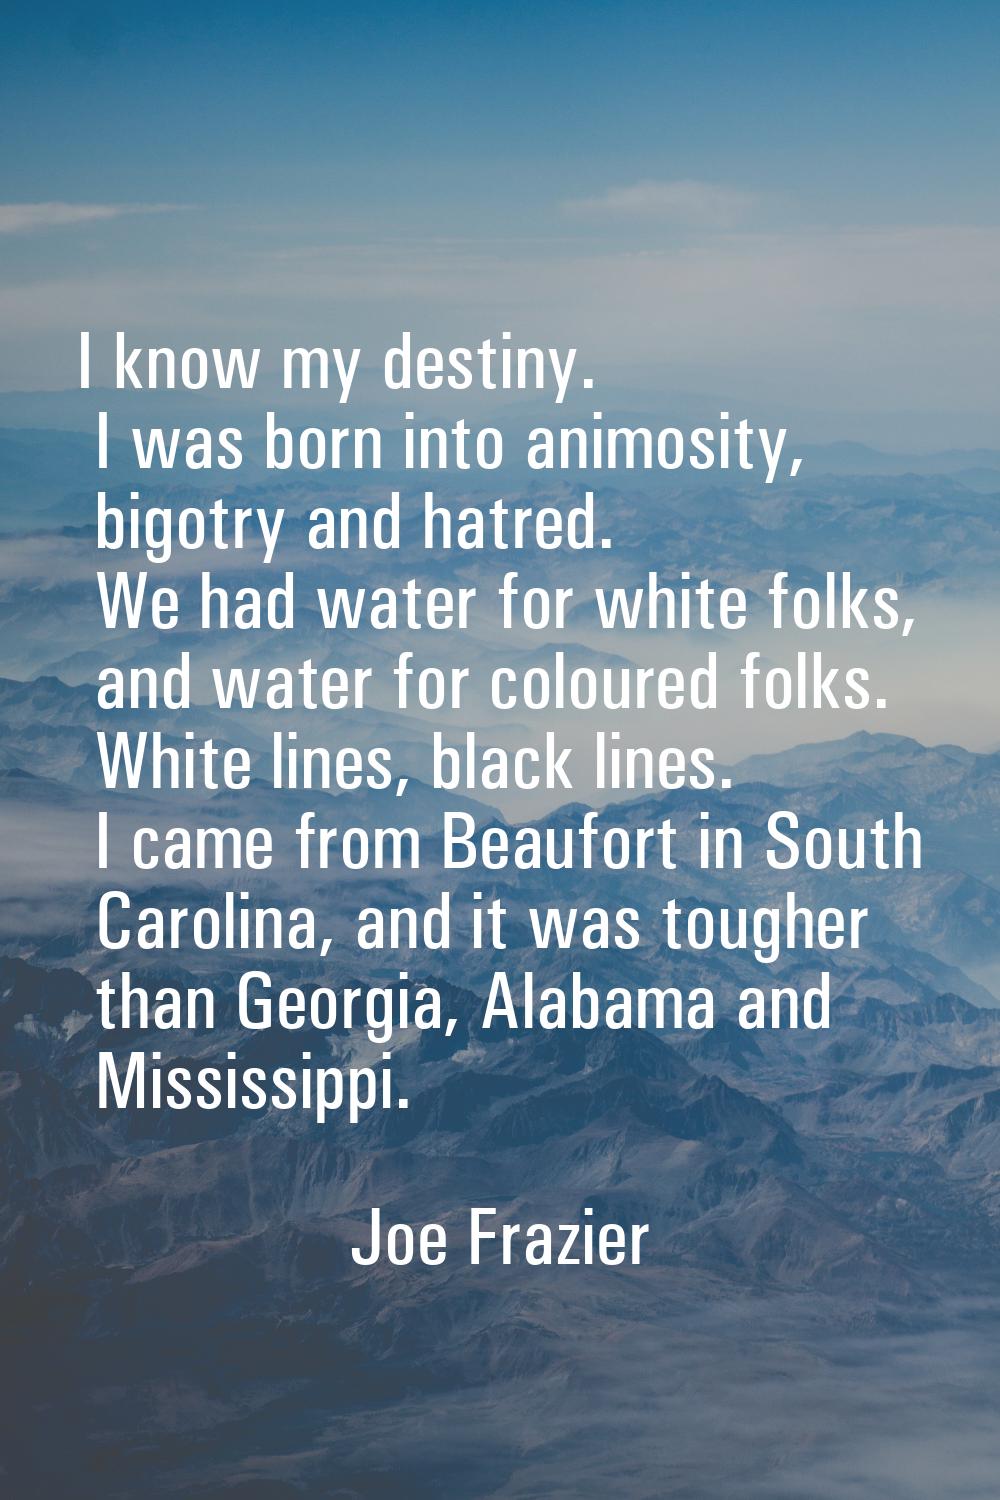 I know my destiny. I was born into animosity, bigotry and hatred. We had water for white folks, and